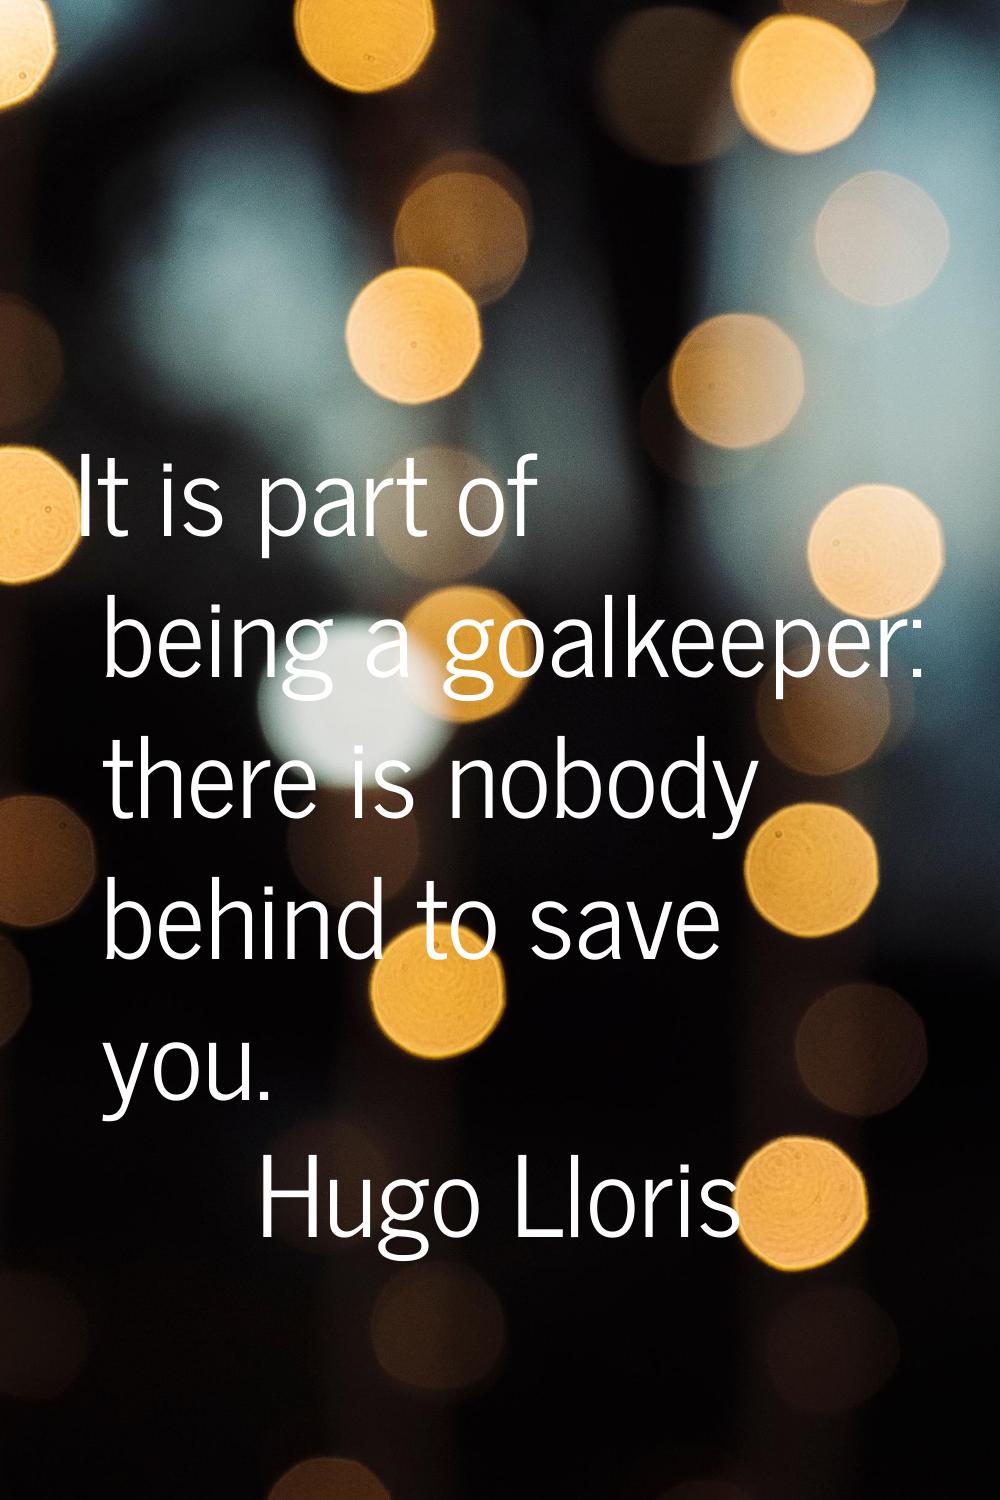 It is part of being a goalkeeper: there is nobody behind to save you.